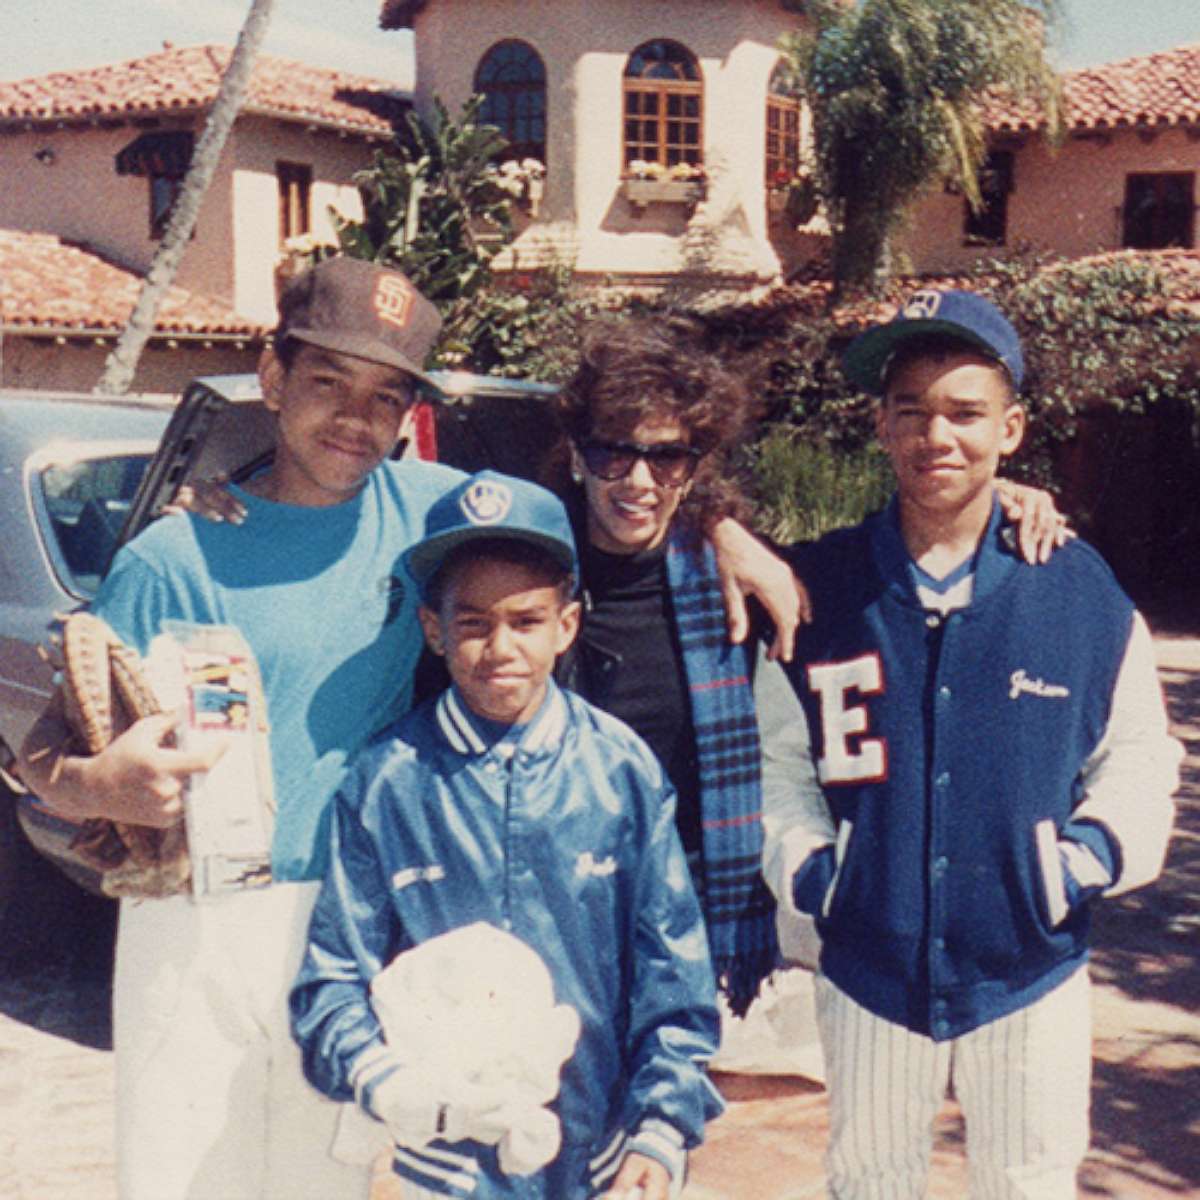 Delores "Dee Dee" Jackson (center) is seen here with her three sons, TJ, Taj and Taryll Jackson, in this undated family photo.